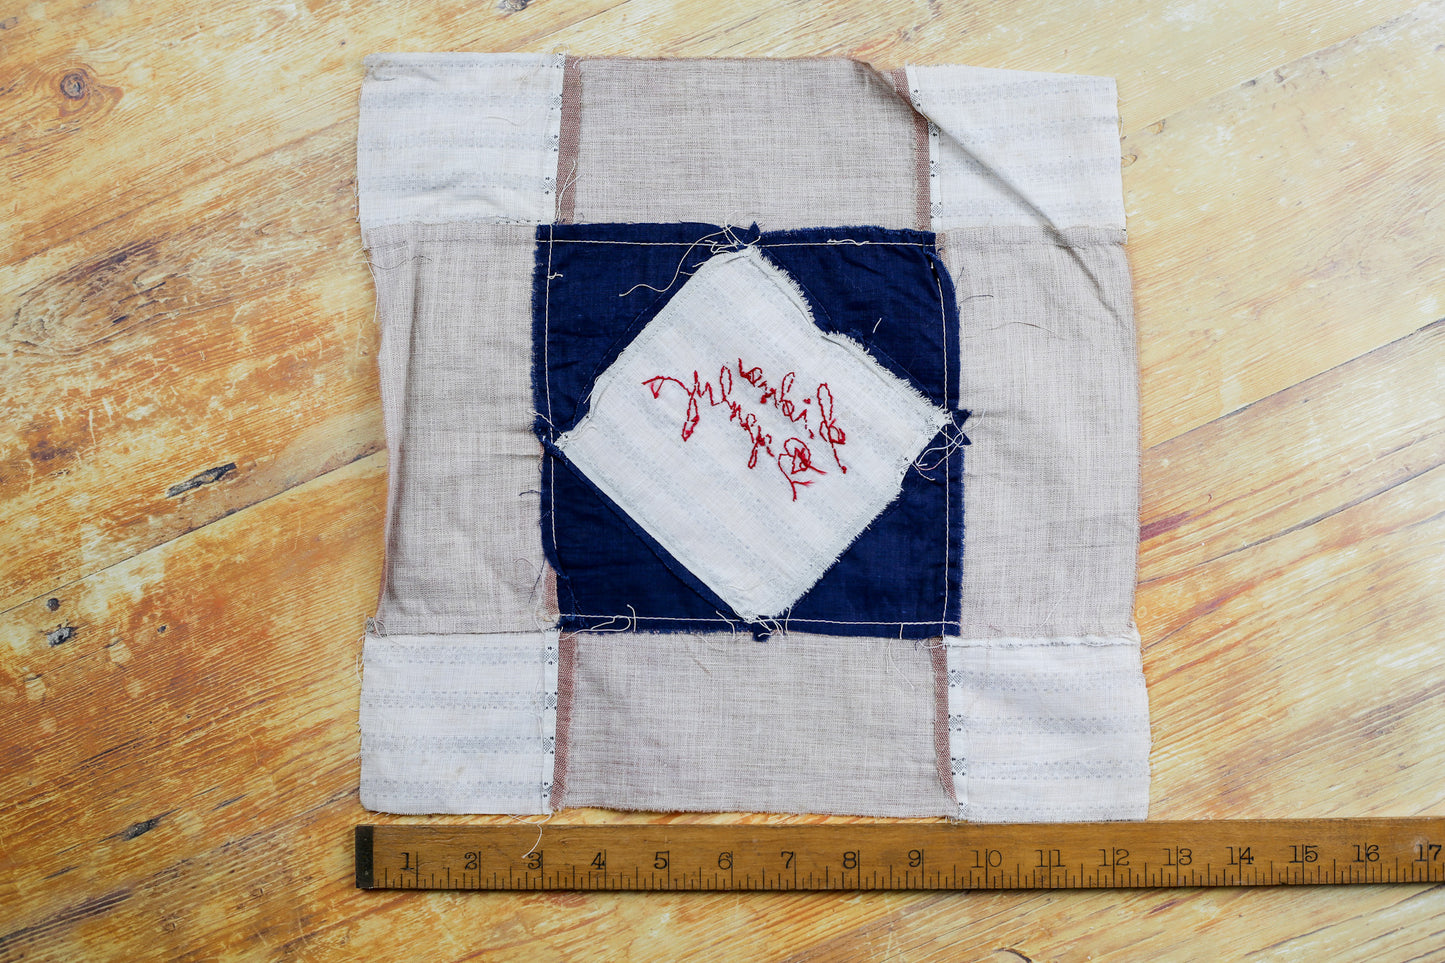 Antique Blue and Brown “Sidna Byerley” Quilt Block